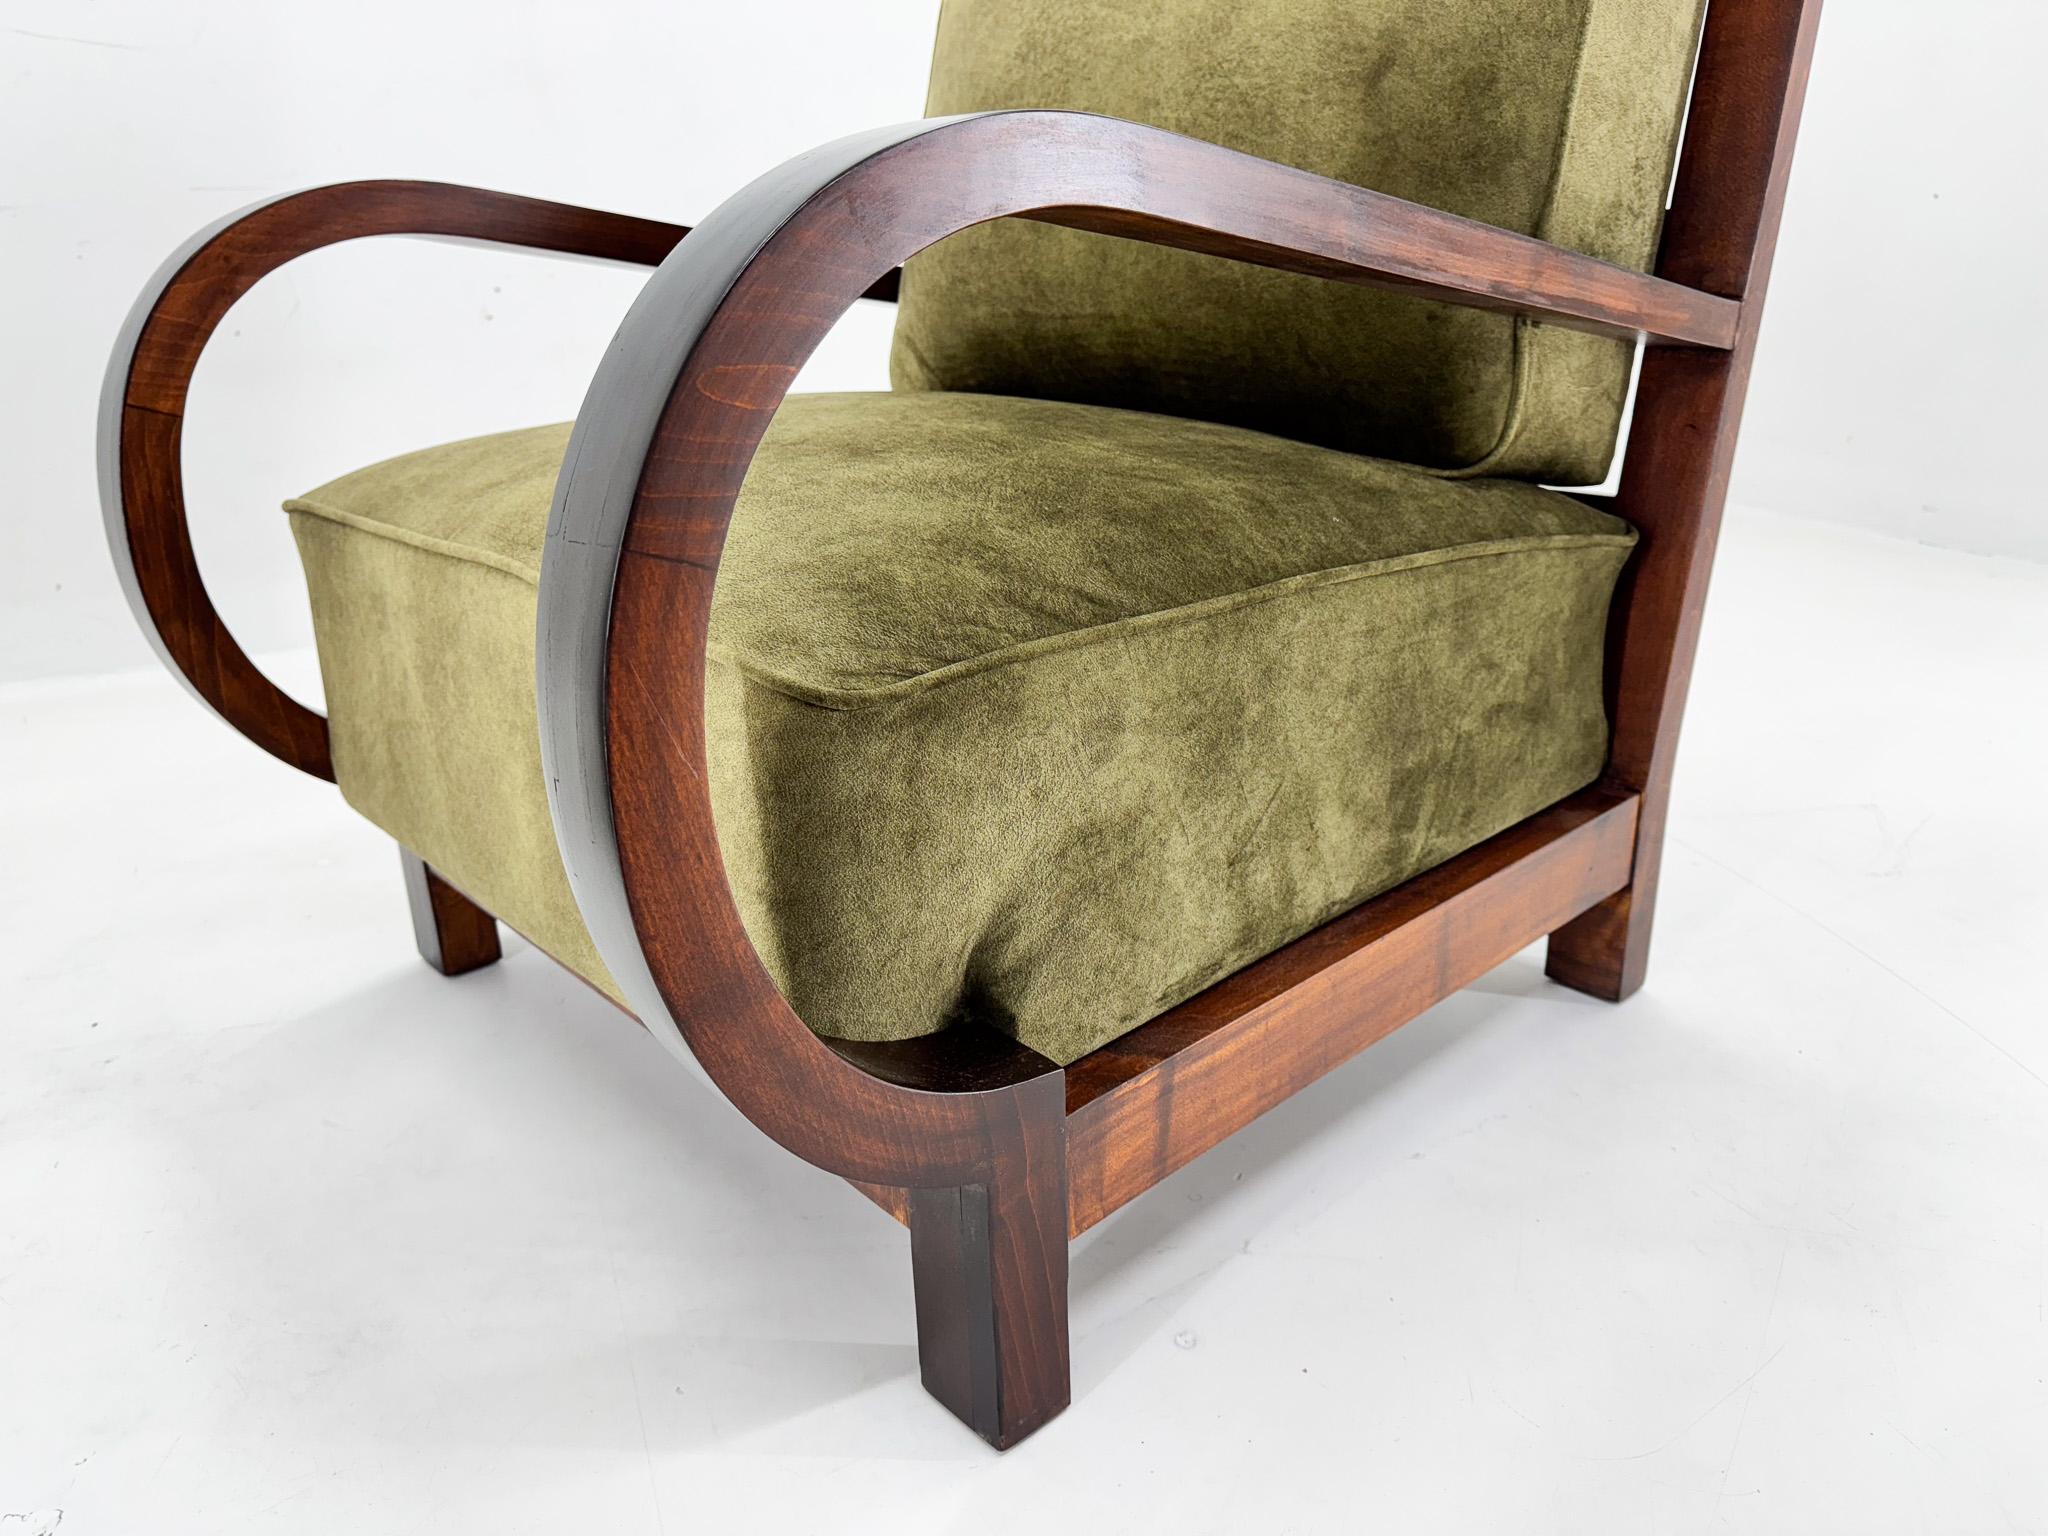 Pair of Art Deco Beech Wood Armchairs, 1930's, Newly Upholstered For Sale 10